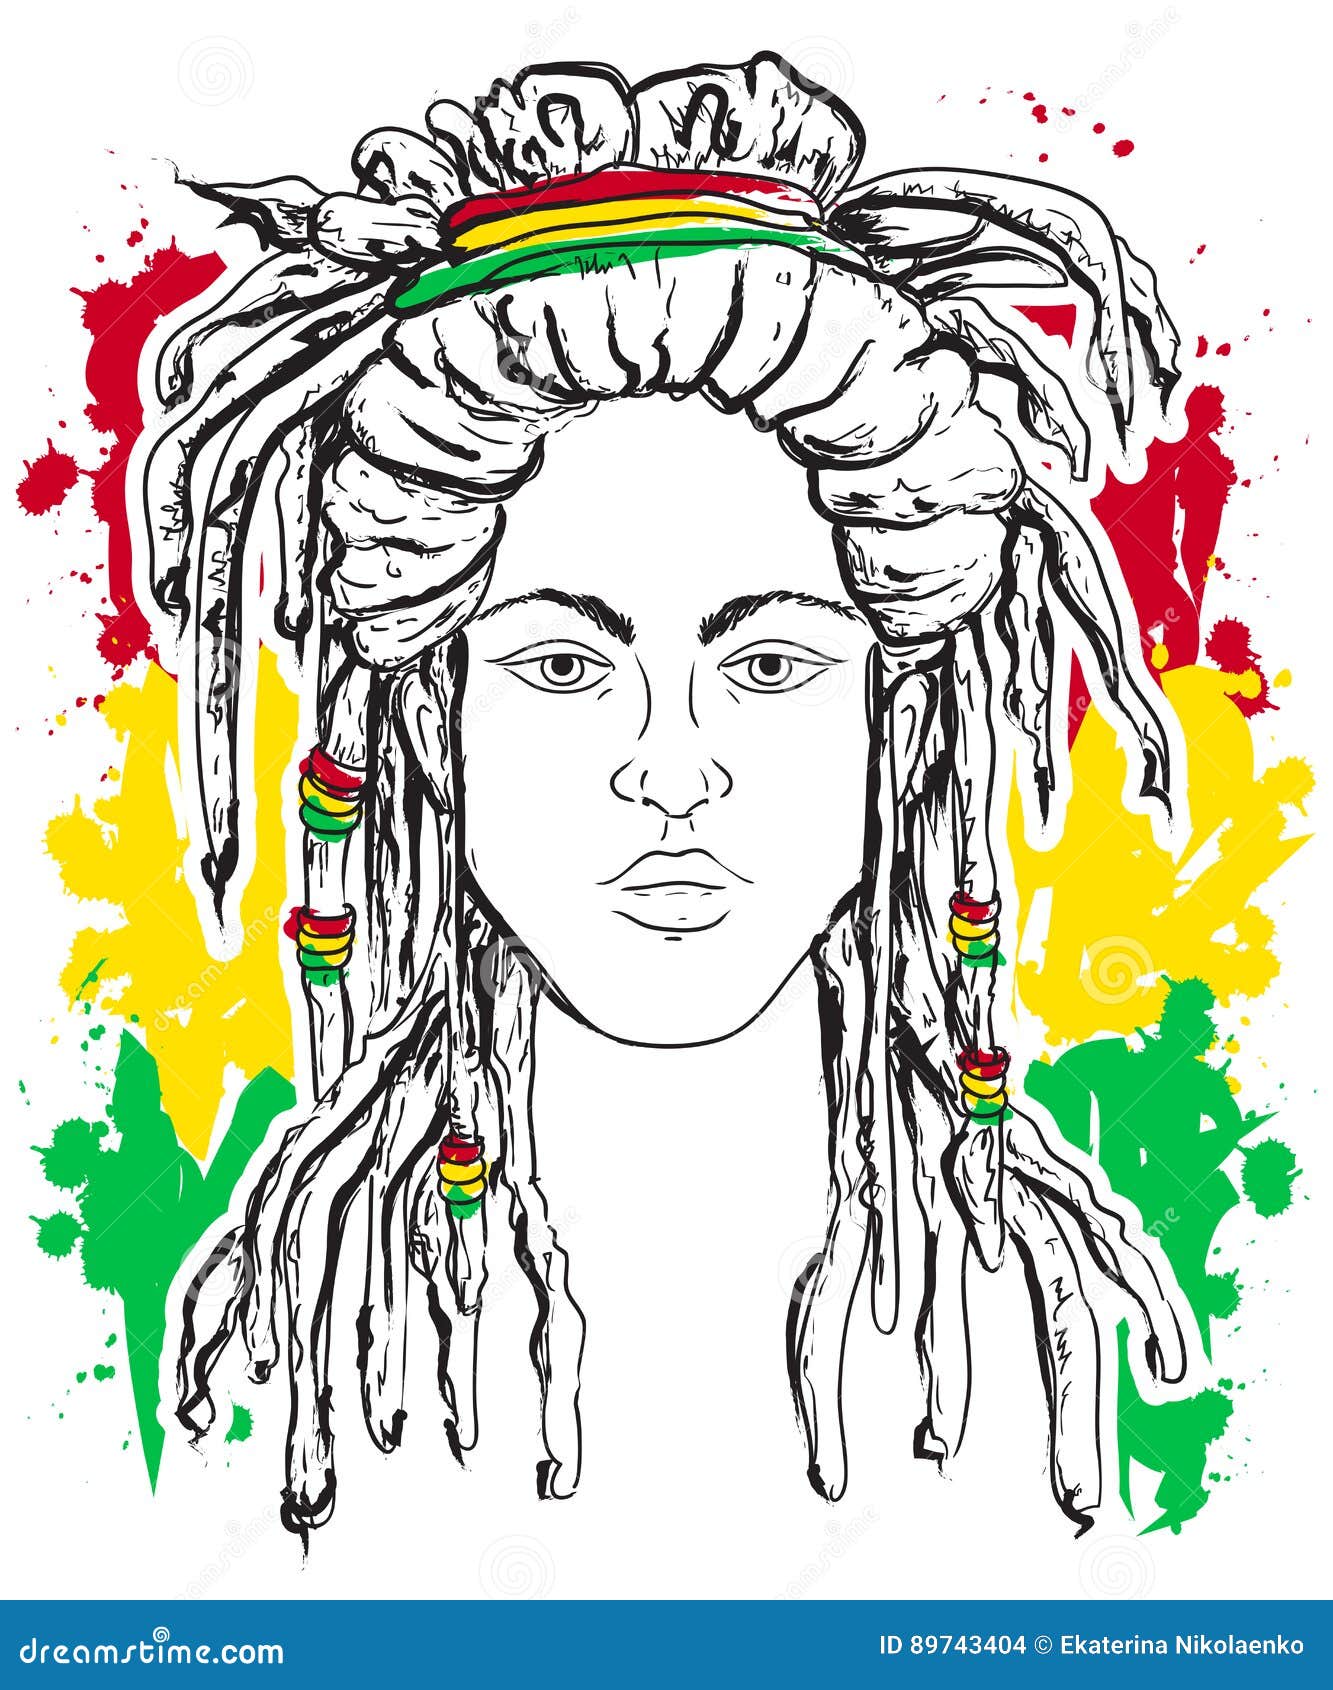 Dreads Cartoons, Illustrations & Vector Stock Images - 204 